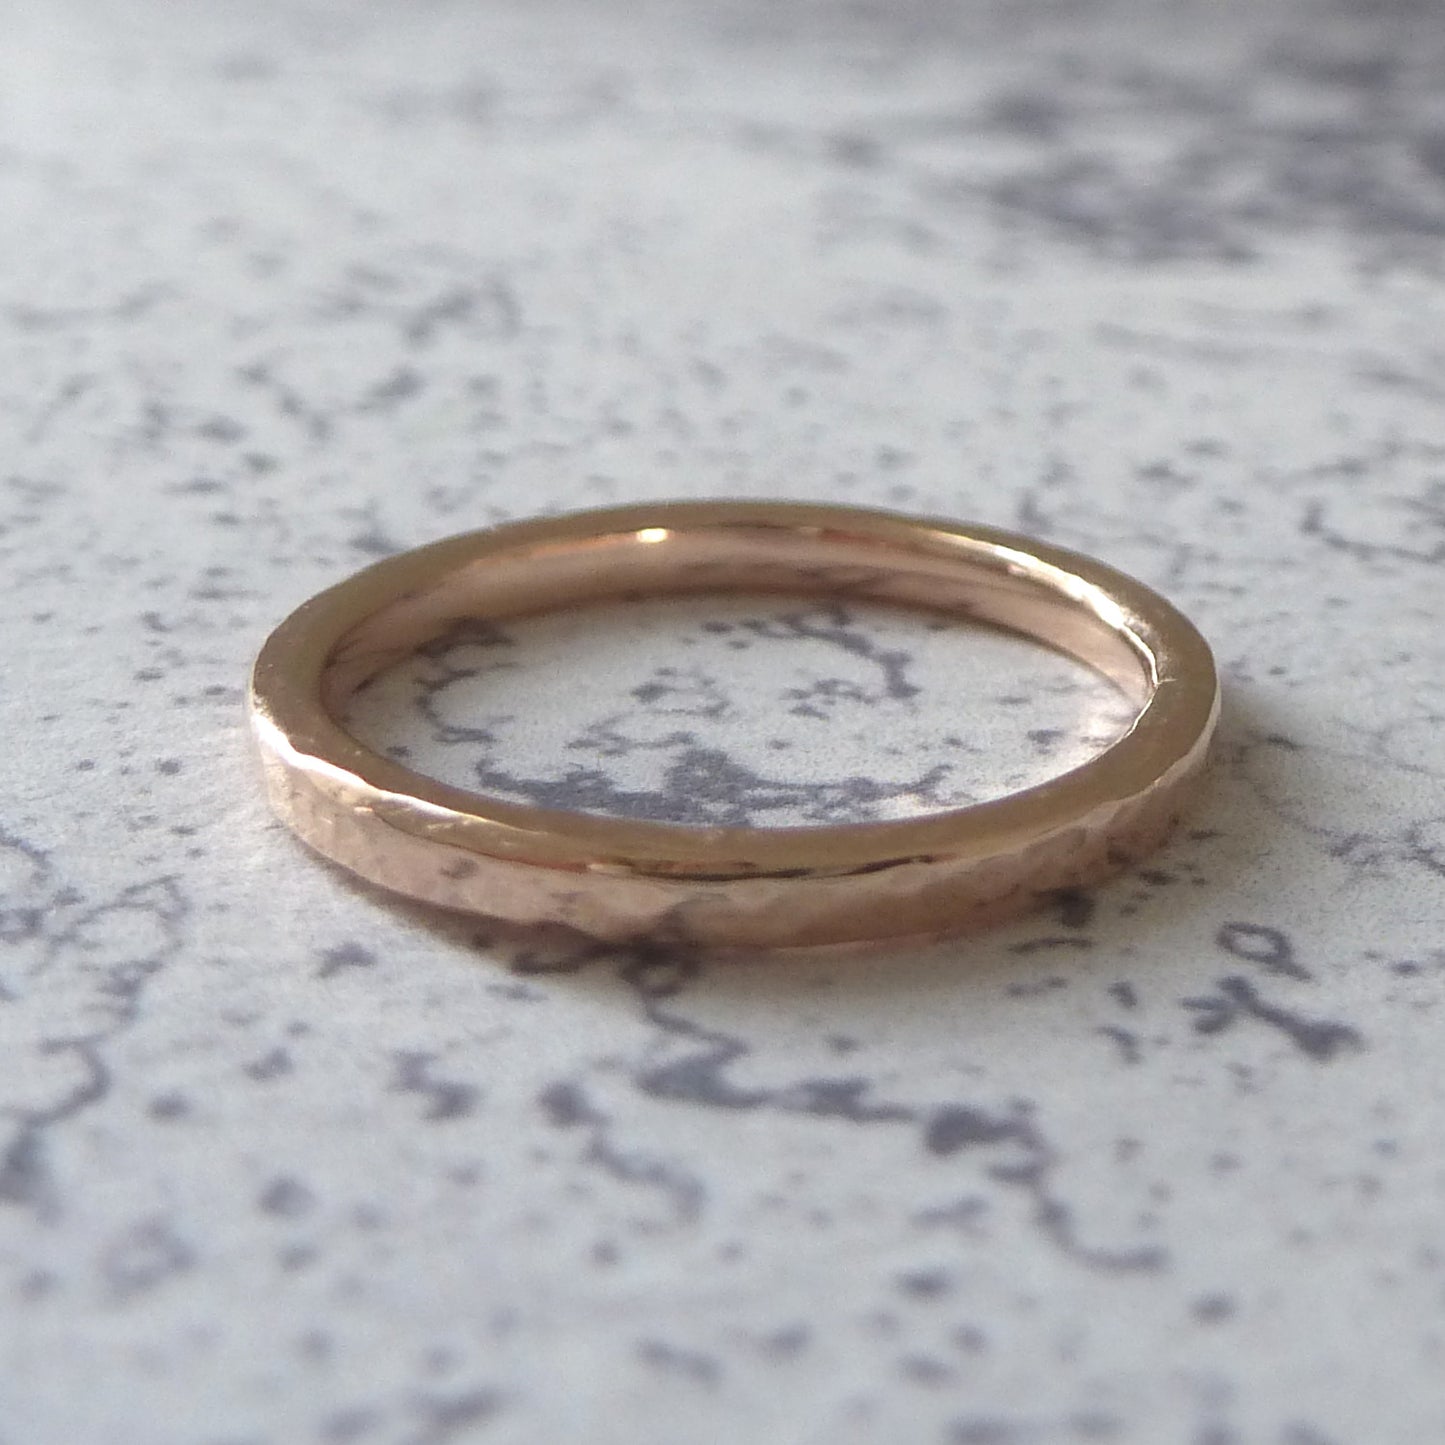 Elegant Band Ring in 9ct Gold - 2mm - rose - Hammered or Smooth